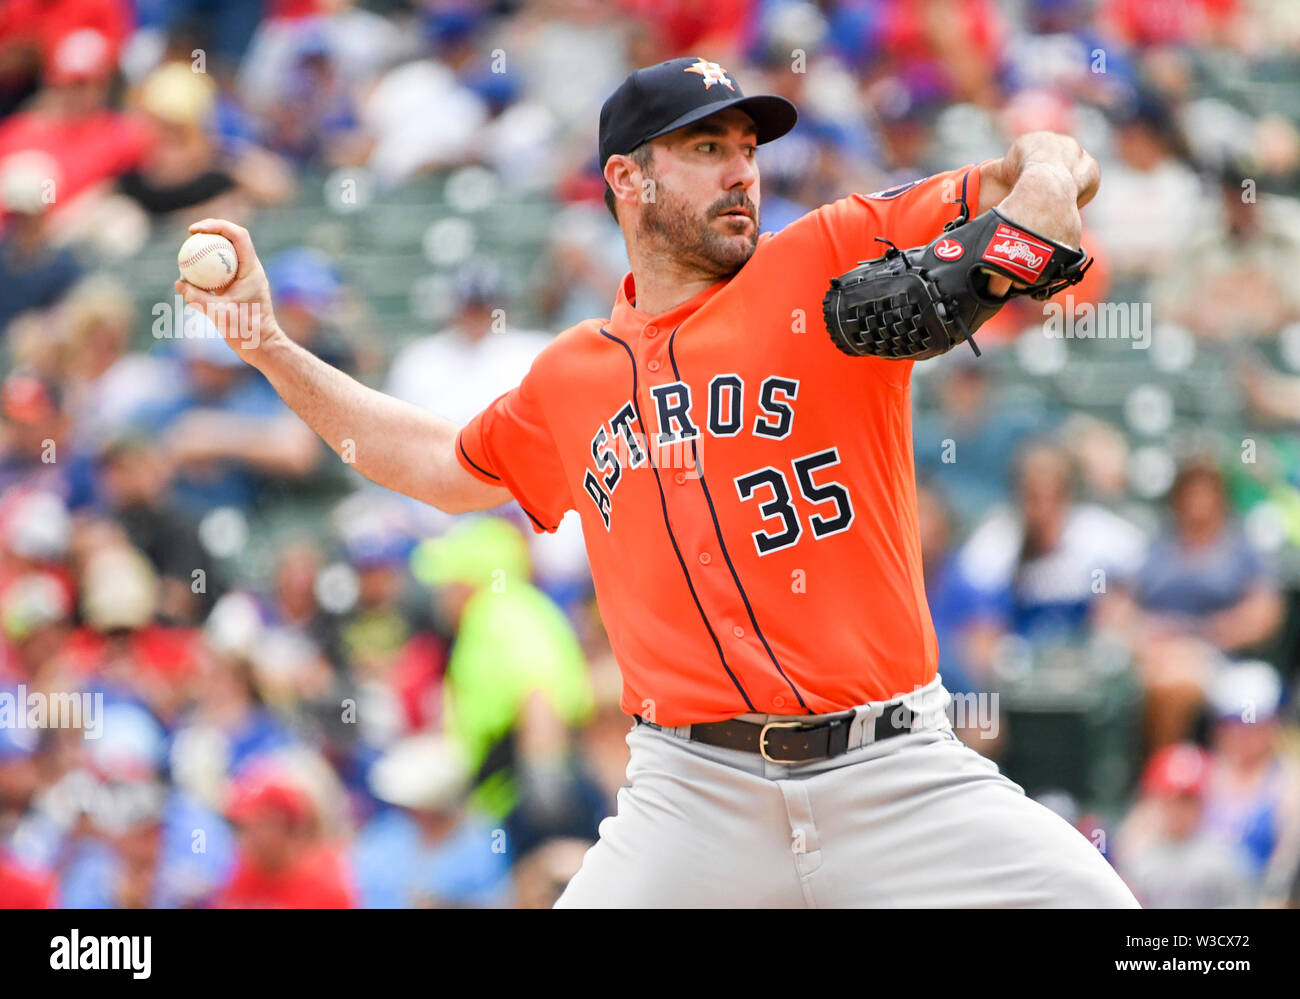 July 14, 2019: Houston Astros starting pitcher Justin Verlander #35 pitched six innings and gave up 2 runs and collected the win during an afternoon MLB game between the Houston Astros and the Texas Rangers at Globe Life Park in Arlington, TX Houston defeated Texas 12-4 Albert Pena/CSM Stock Photo